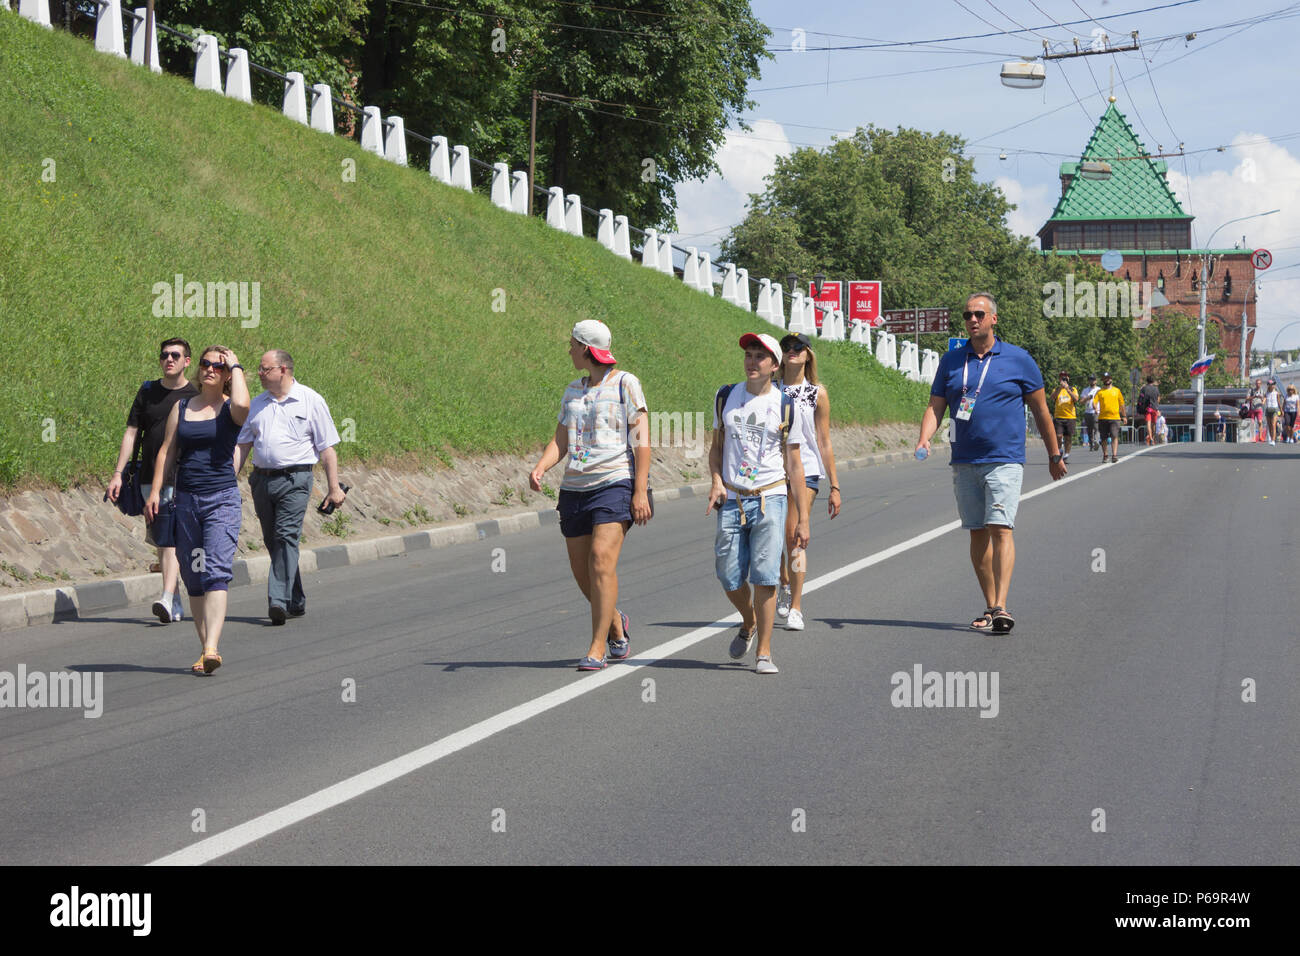 Nizhny Novgorod, Russia - June 24, 2018: It one of cities of the World Cup 2018 in Russia. Many of city's roads are open for hiking fans Stock Photo